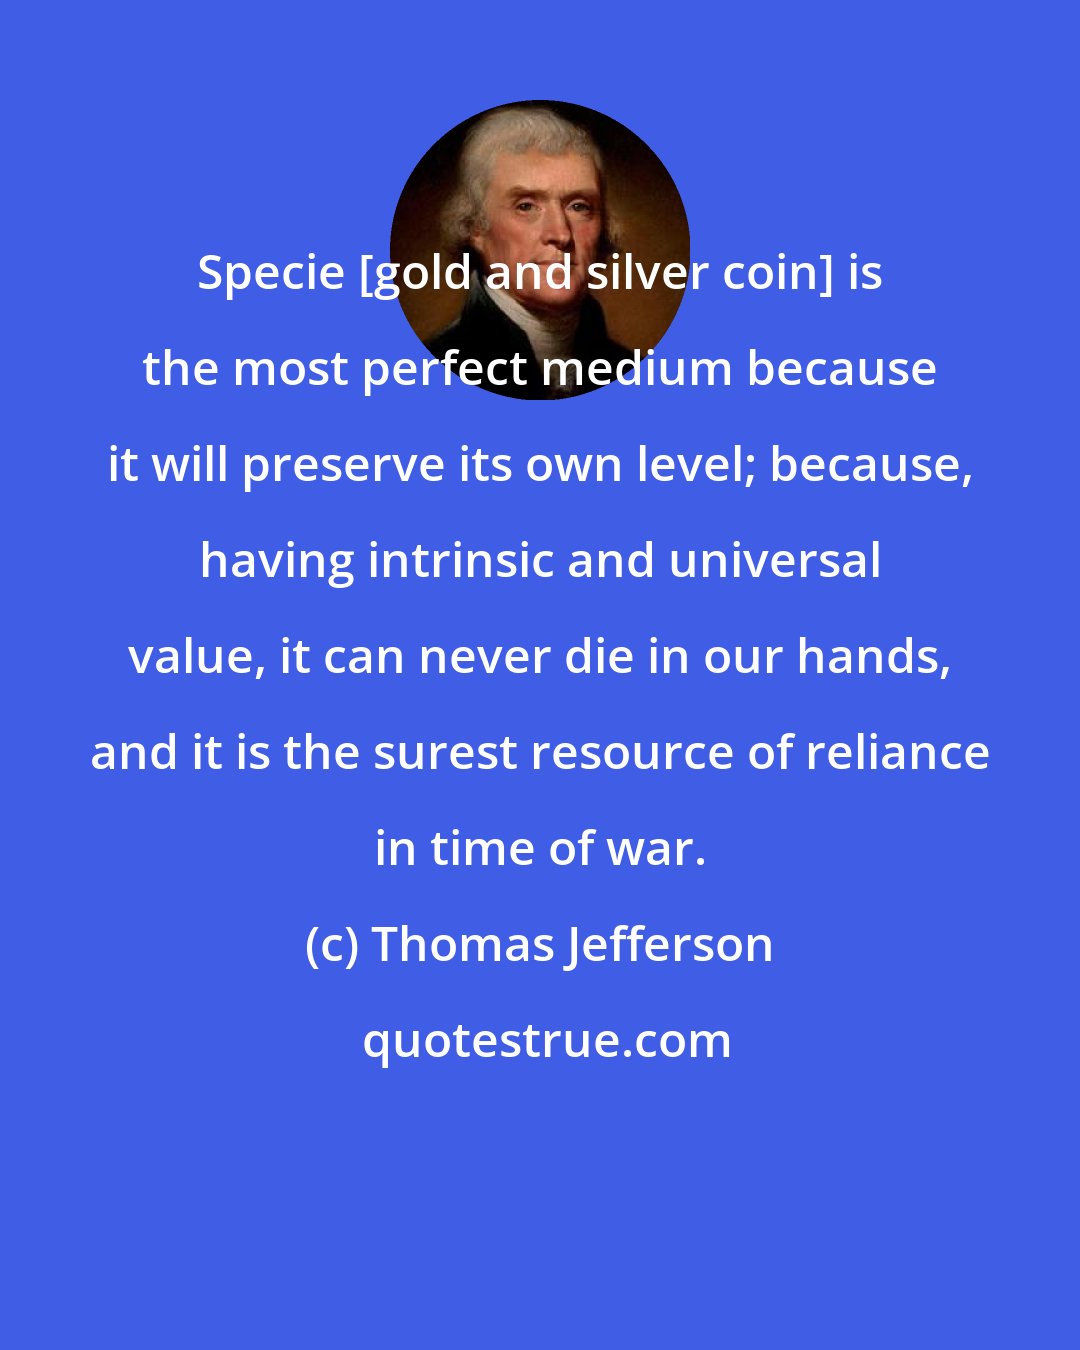 Thomas Jefferson: Specie [gold and silver coin] is the most perfect medium because it will preserve its own level; because, having intrinsic and universal value, it can never die in our hands, and it is the surest resource of reliance in time of war.